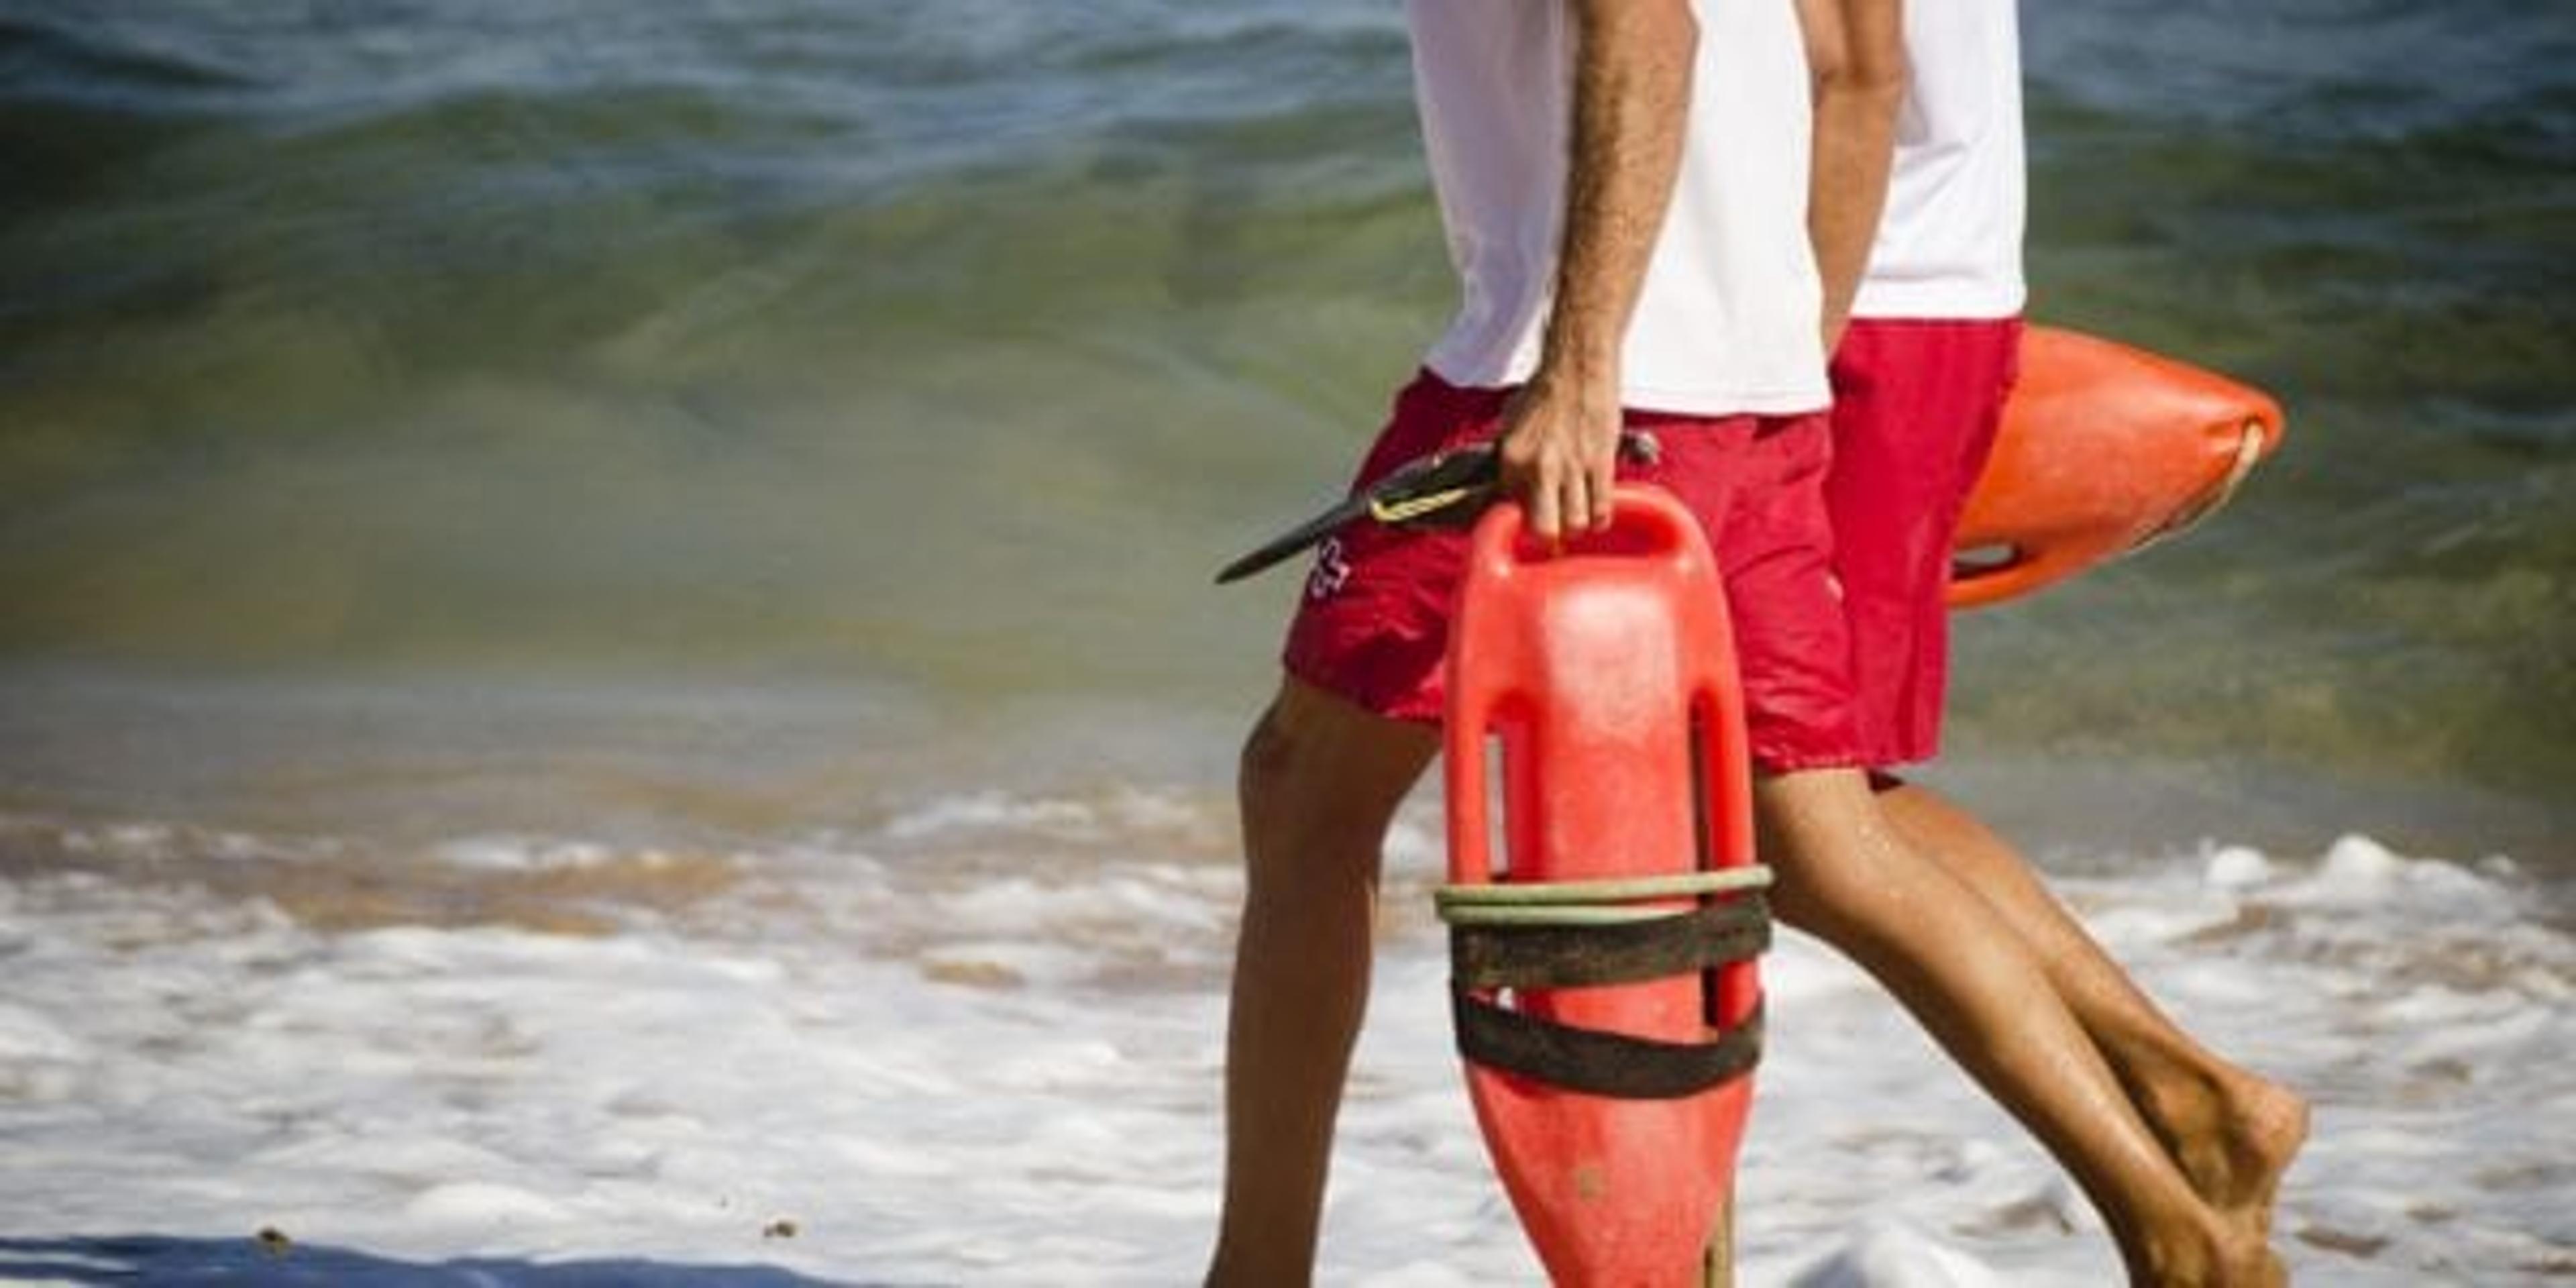 The Top 3 Safety Tips Lifeguards Want You To Know